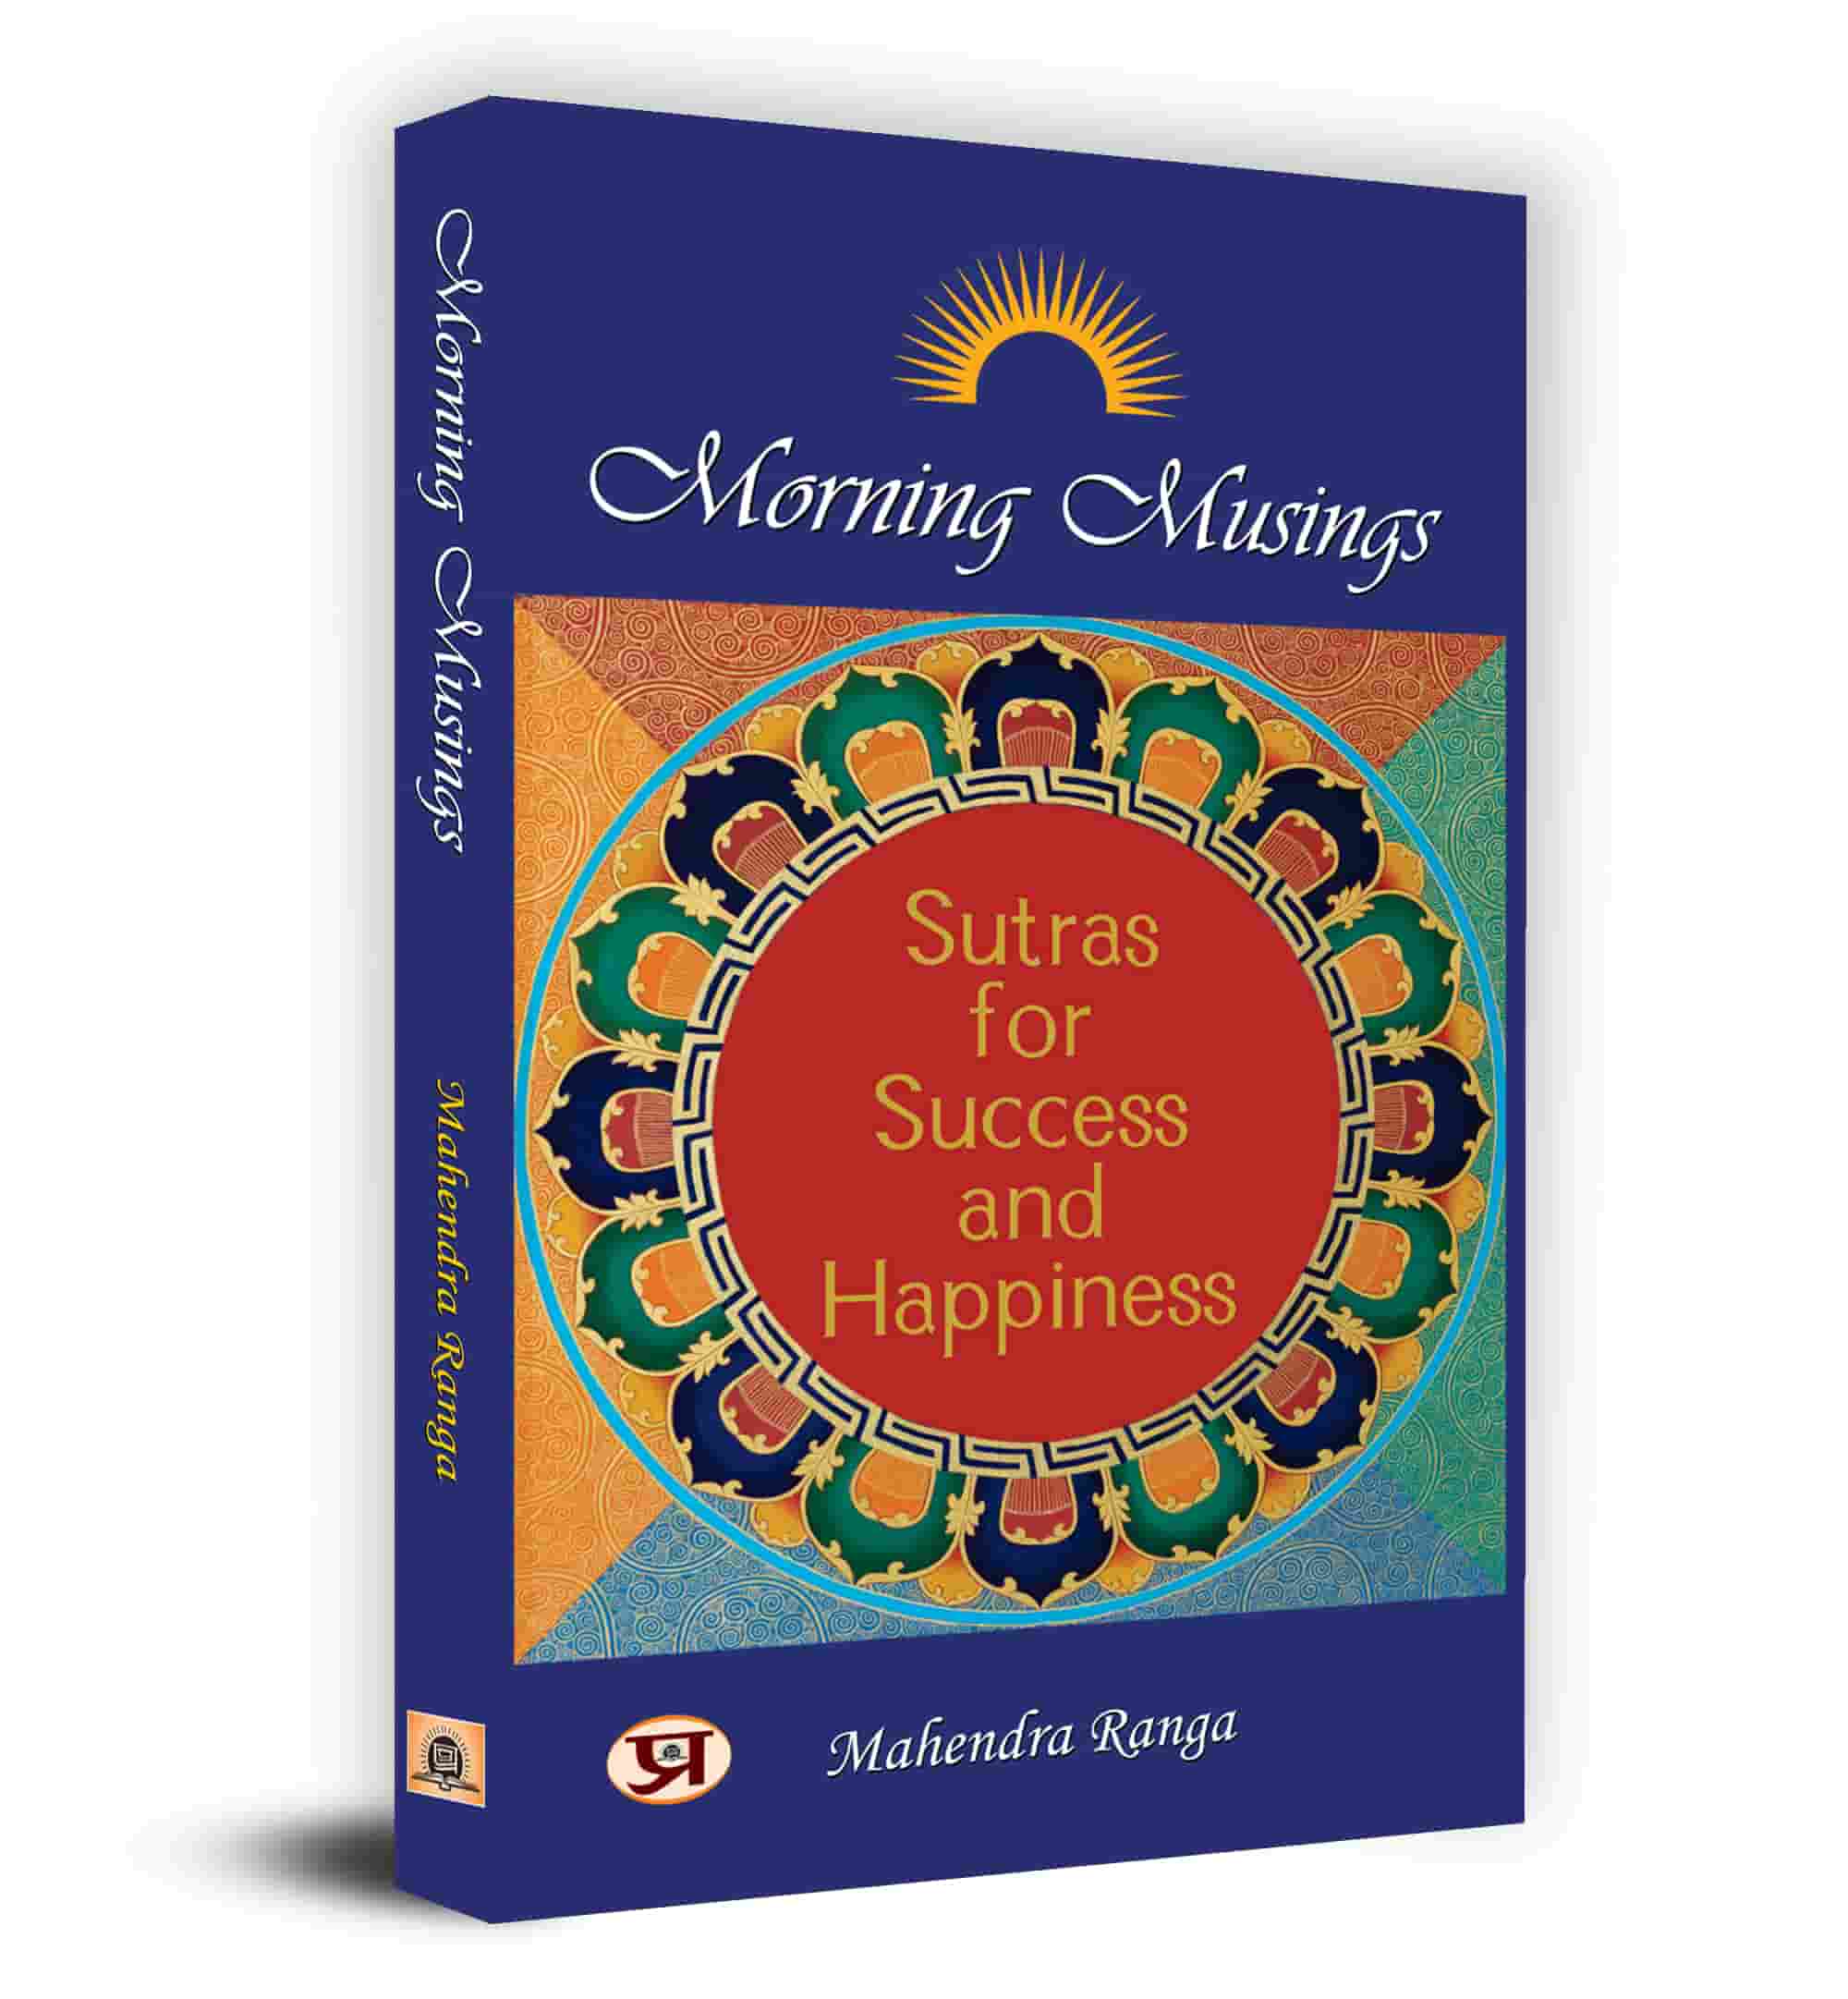 Morning Musings Sutras for Success & Happiness